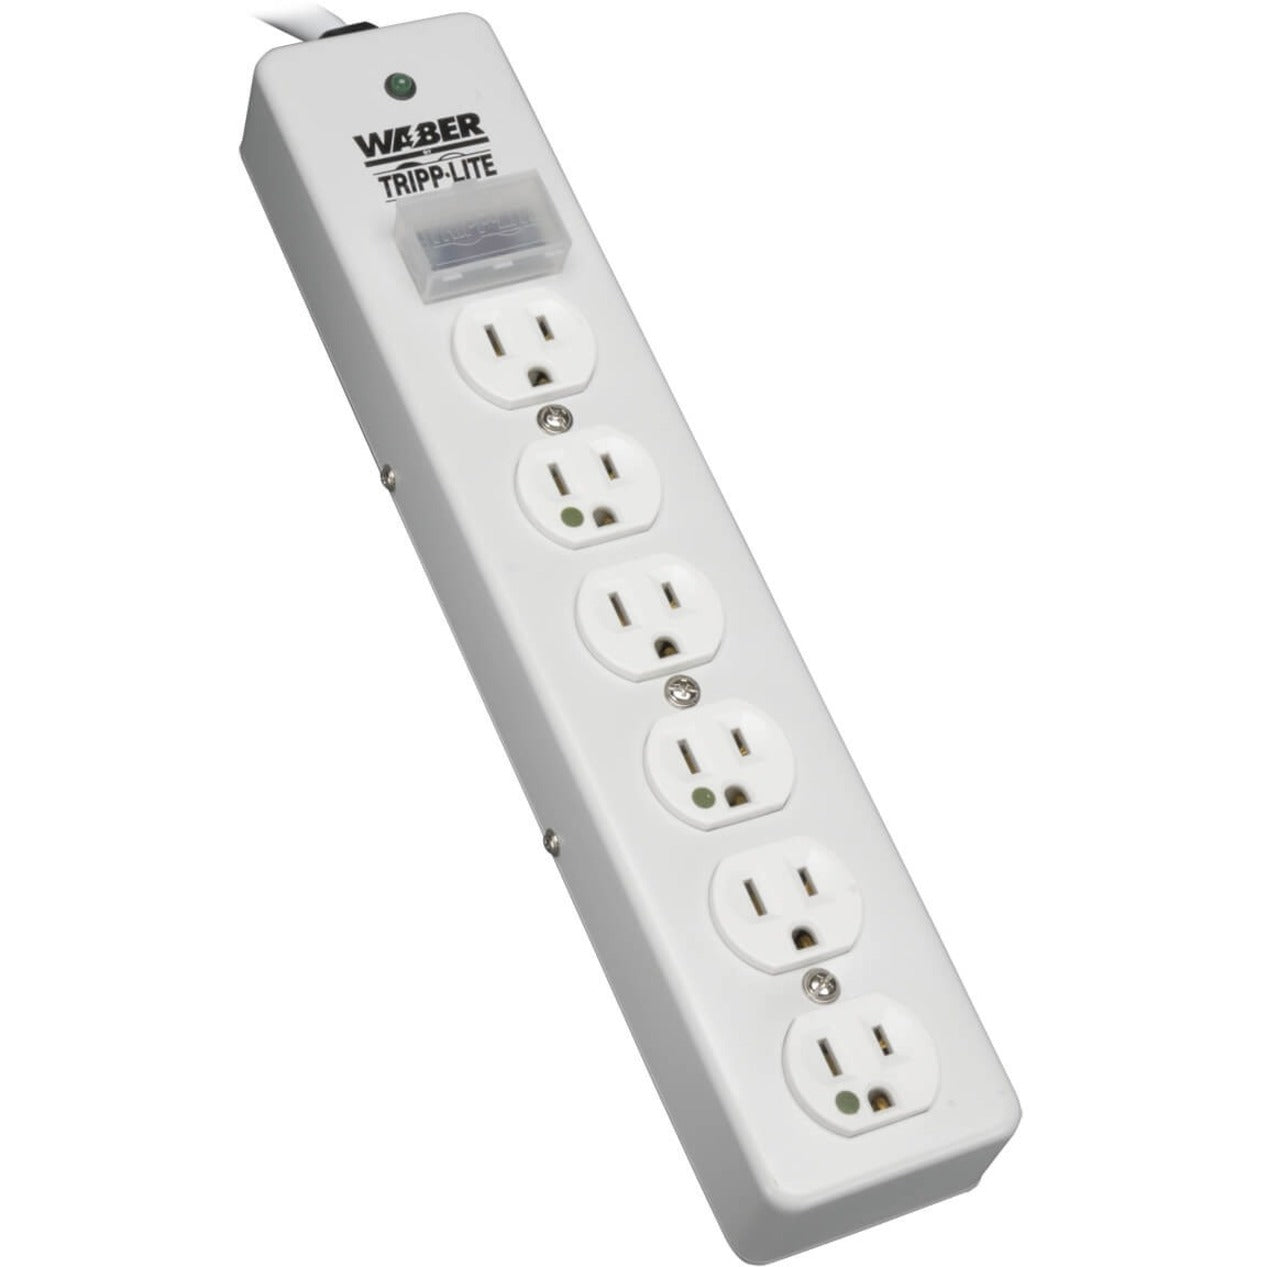 Tripp Lite SPS-615-HG Surge Protector Power Strip, 6 Outlet 15' Cord, Hospital-Grade Receptacles